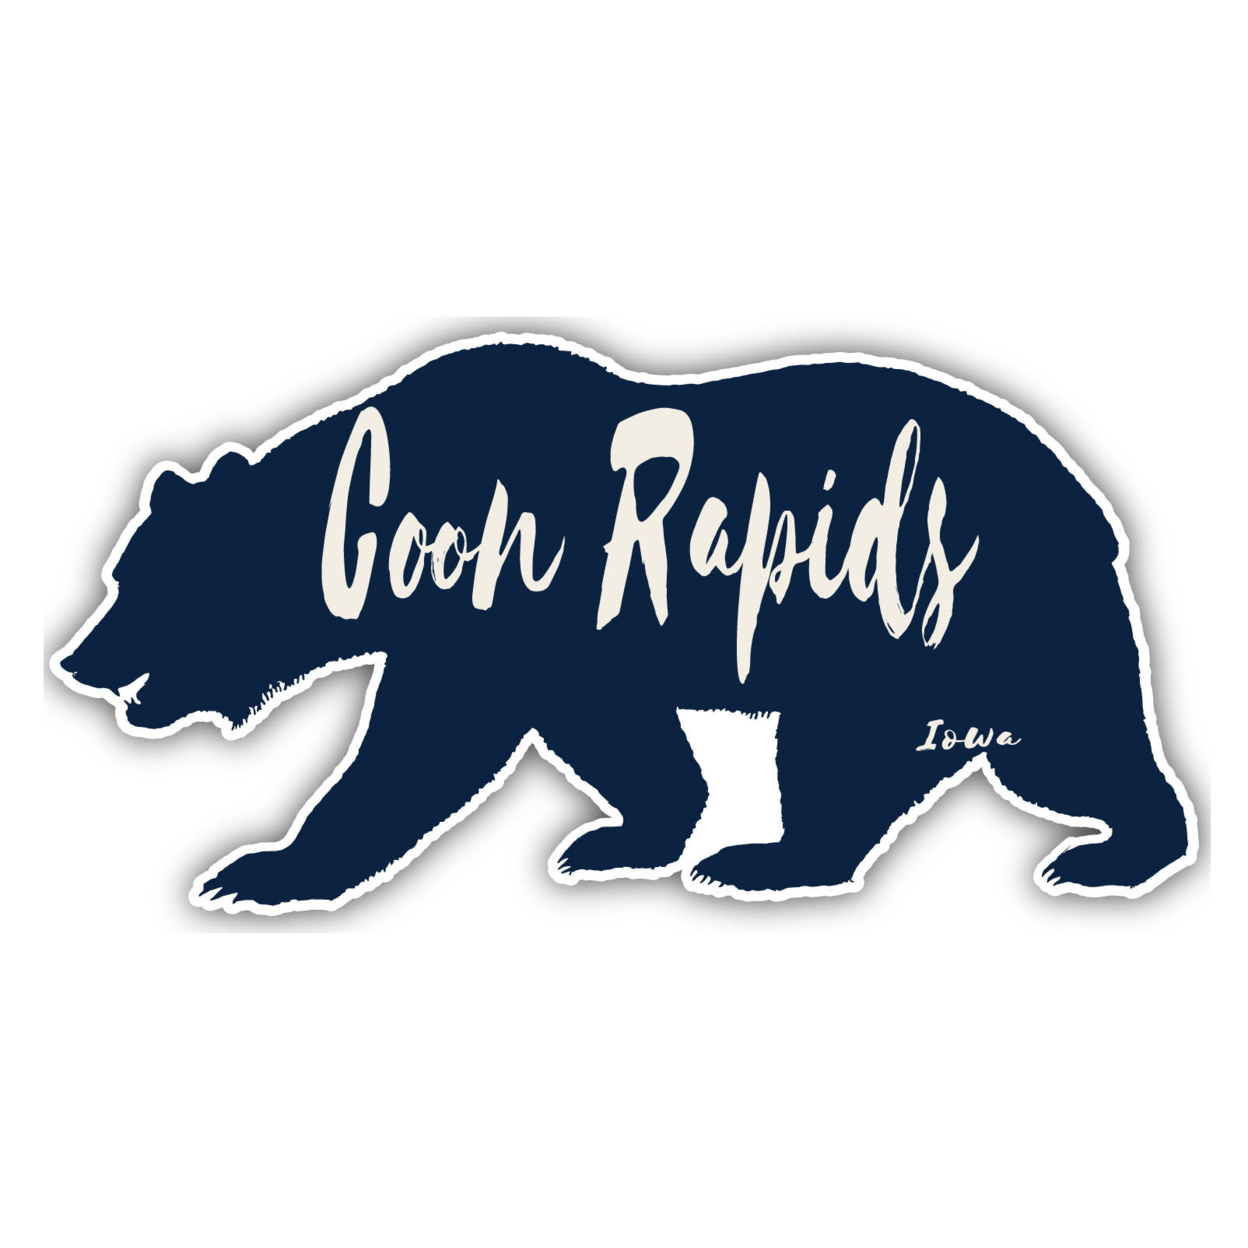 Coon Rapids Iowa Souvenir Decorative Stickers (Choose Theme And Size) - 4-Pack, 4-Inch, Bear